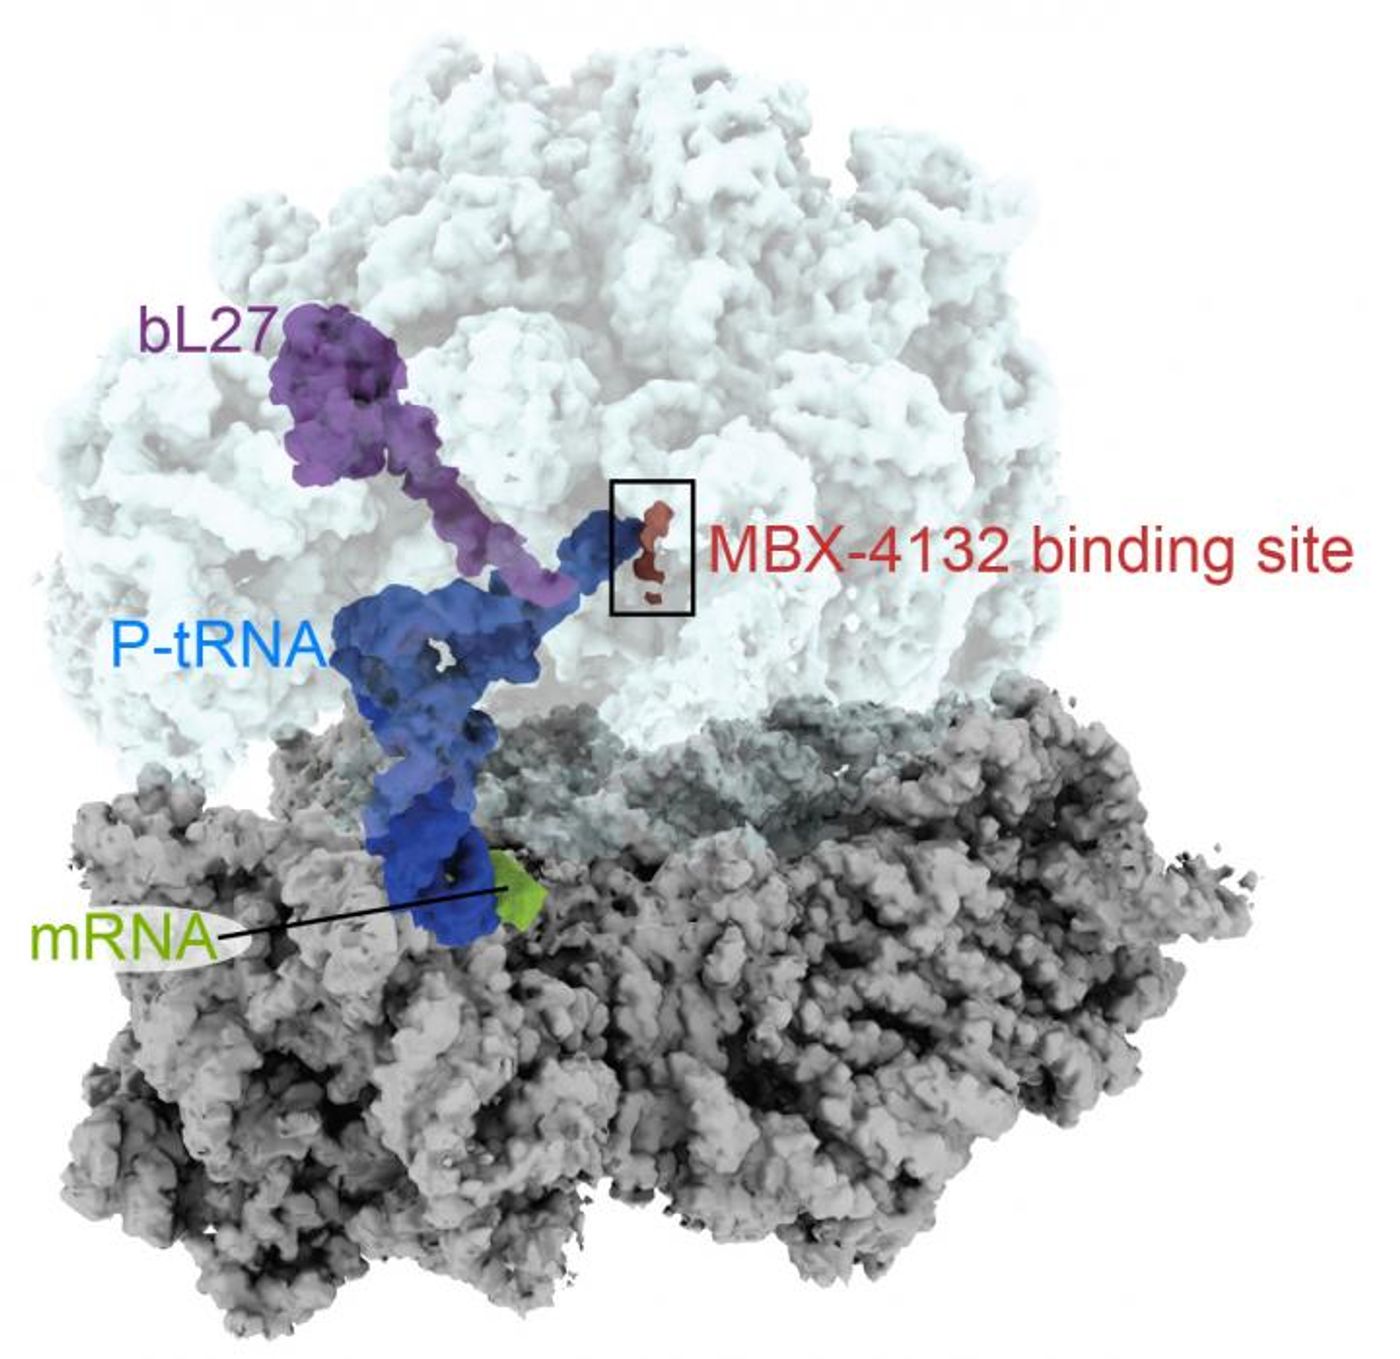 MBX-4132, binds to the bacterial ribosome and, in so doing, displaces a region of a protein (bL27, purple) that is critical to the trans-translation pathway in bacteria. / Credit: Dunham Lab, Emory University